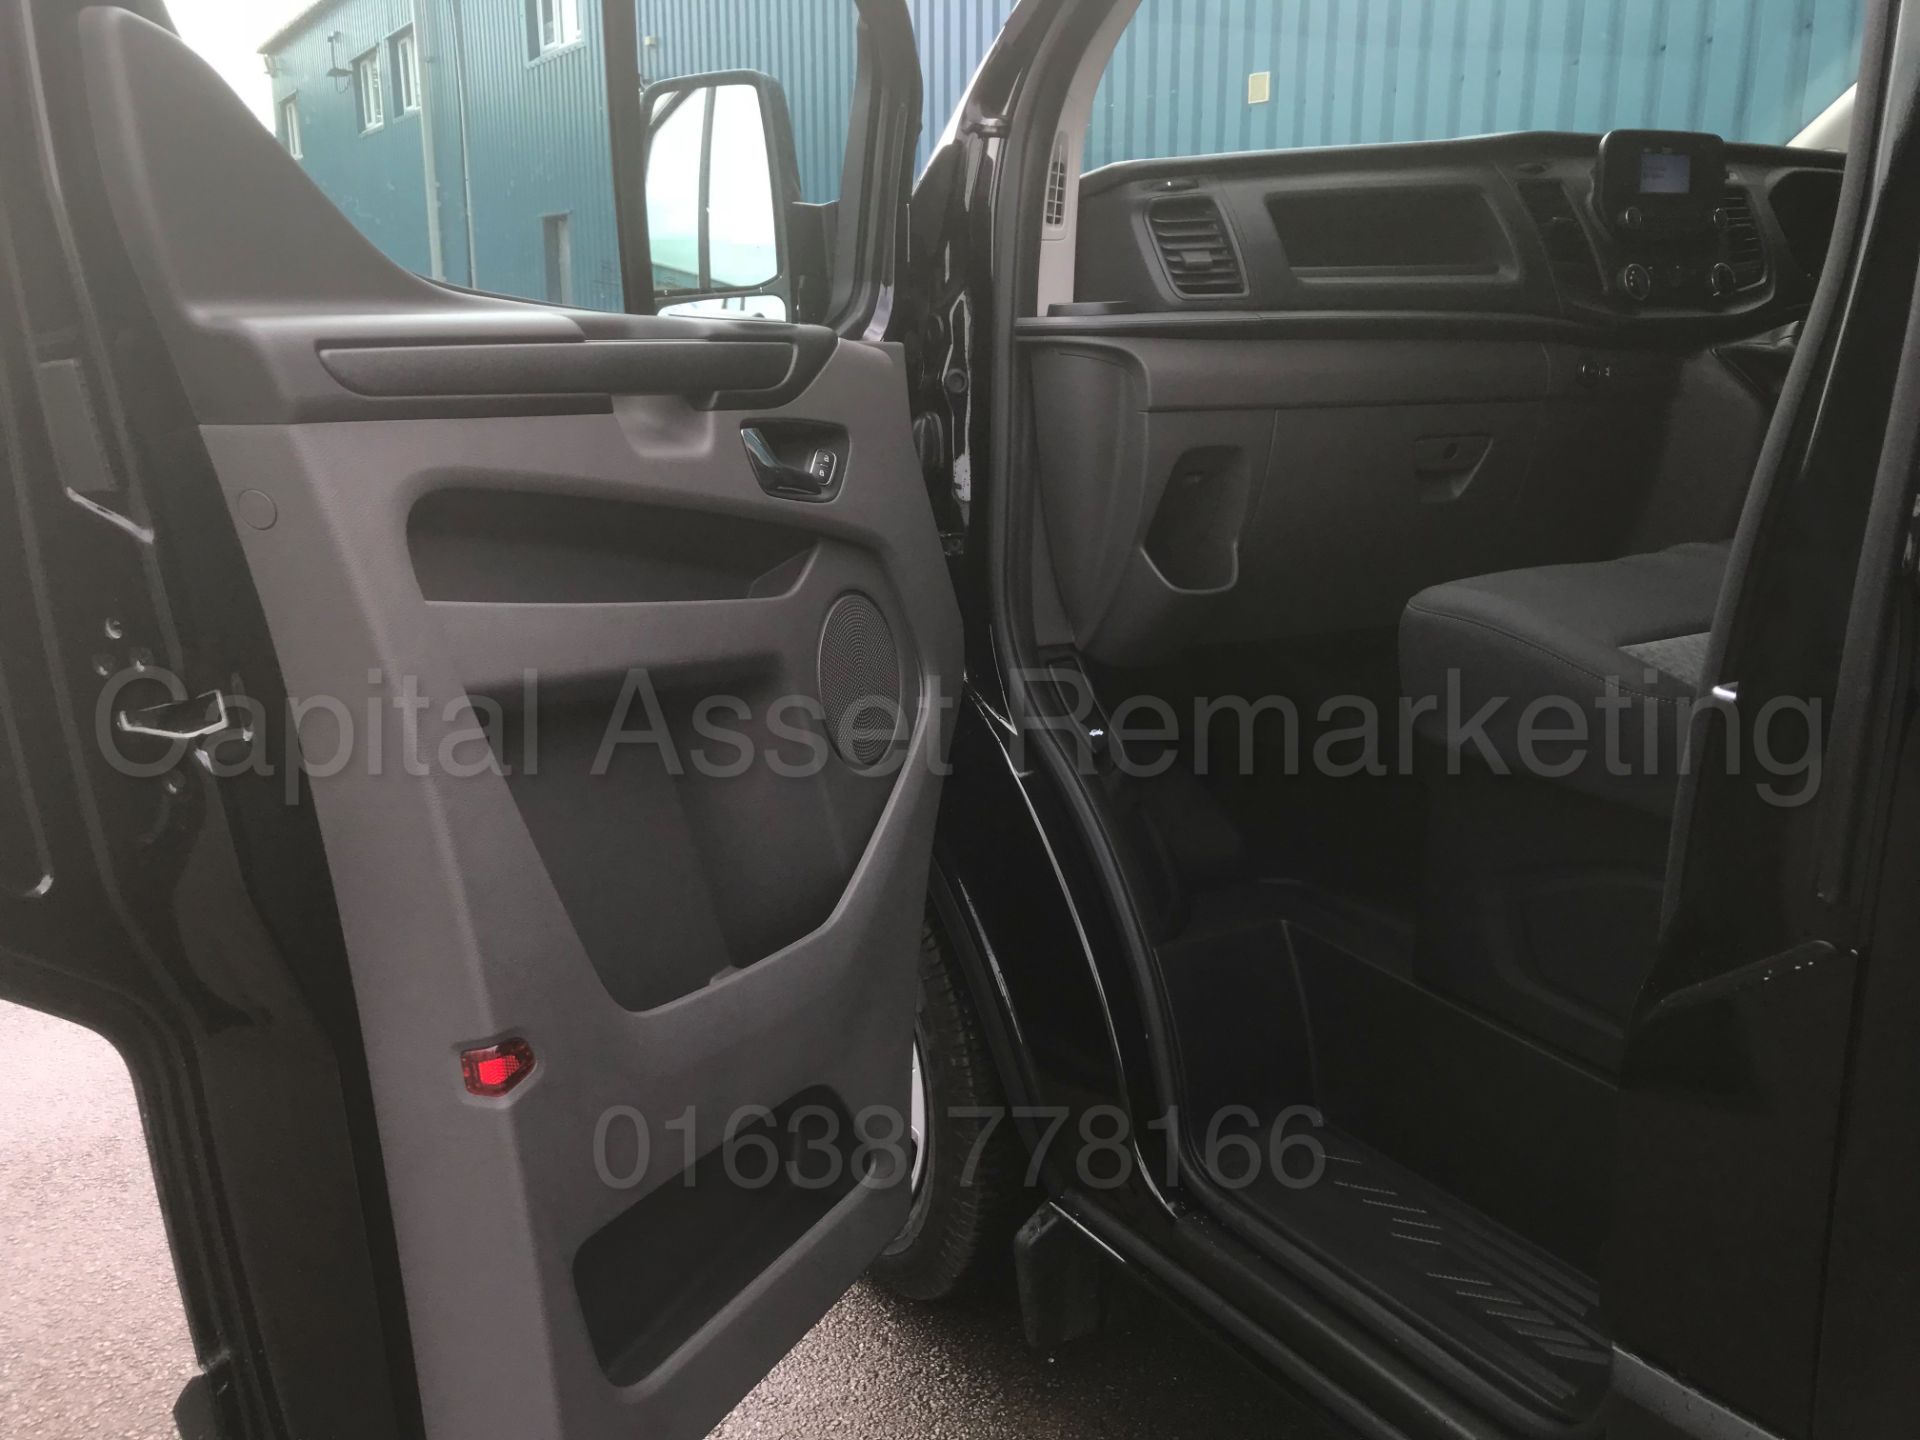 FORD TRANSIT CUSTOM *TREND EDITION* (2018 - ALL NEW MODEL) '2.0 TDCI - 6 SPEED' *DELIVERY MILEAGE* - Image 18 of 49